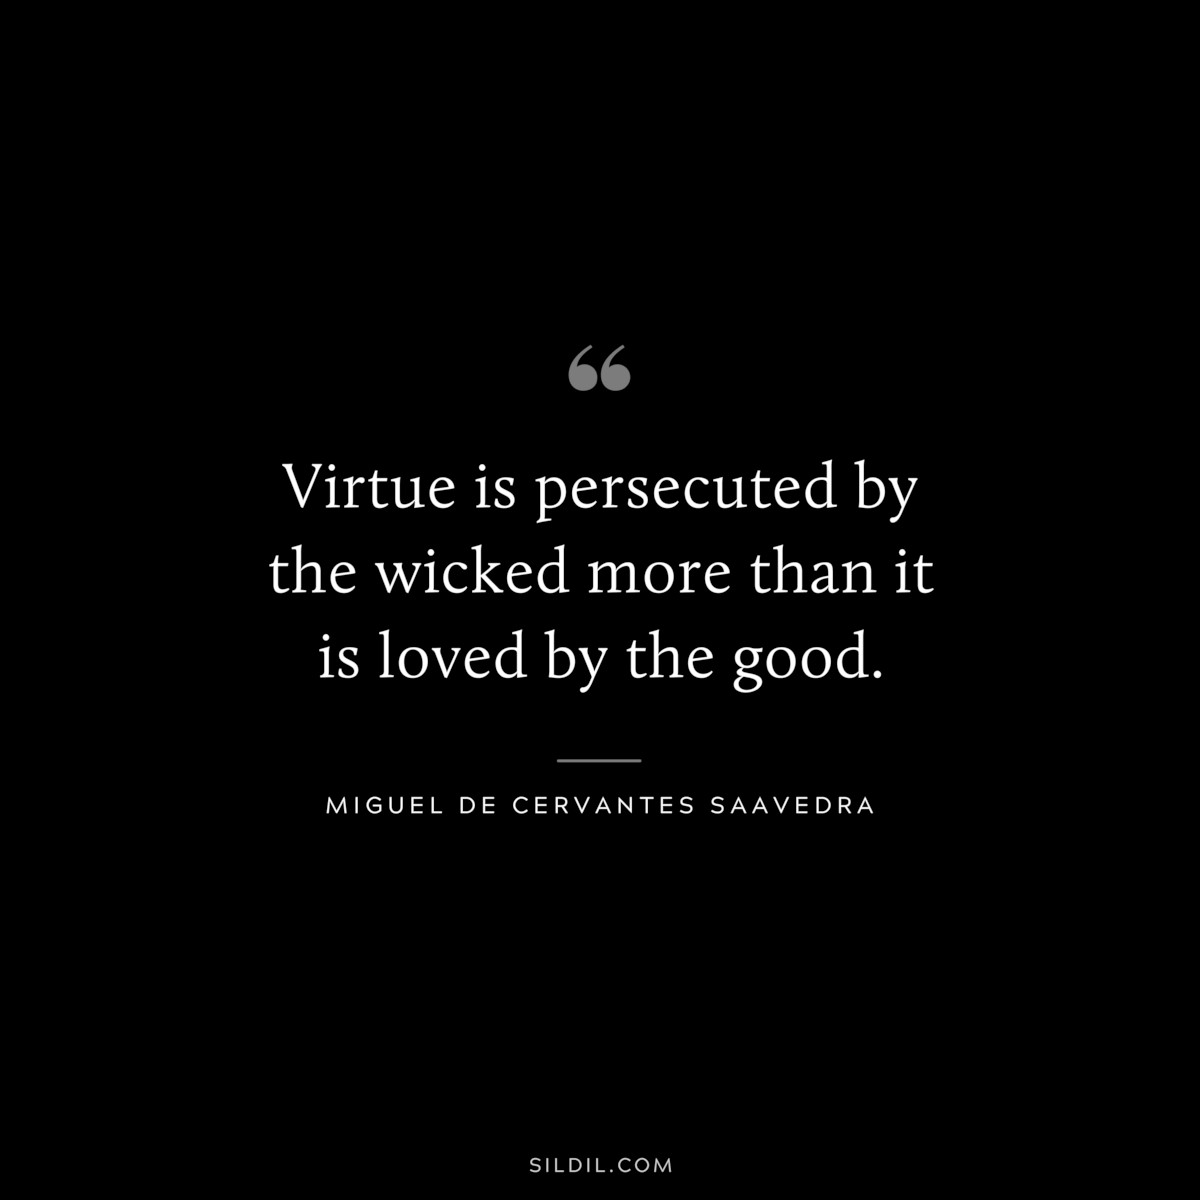 Virtue is persecuted by the wicked more than it is loved by the good. ― Miguel de Cervantes Saavedra